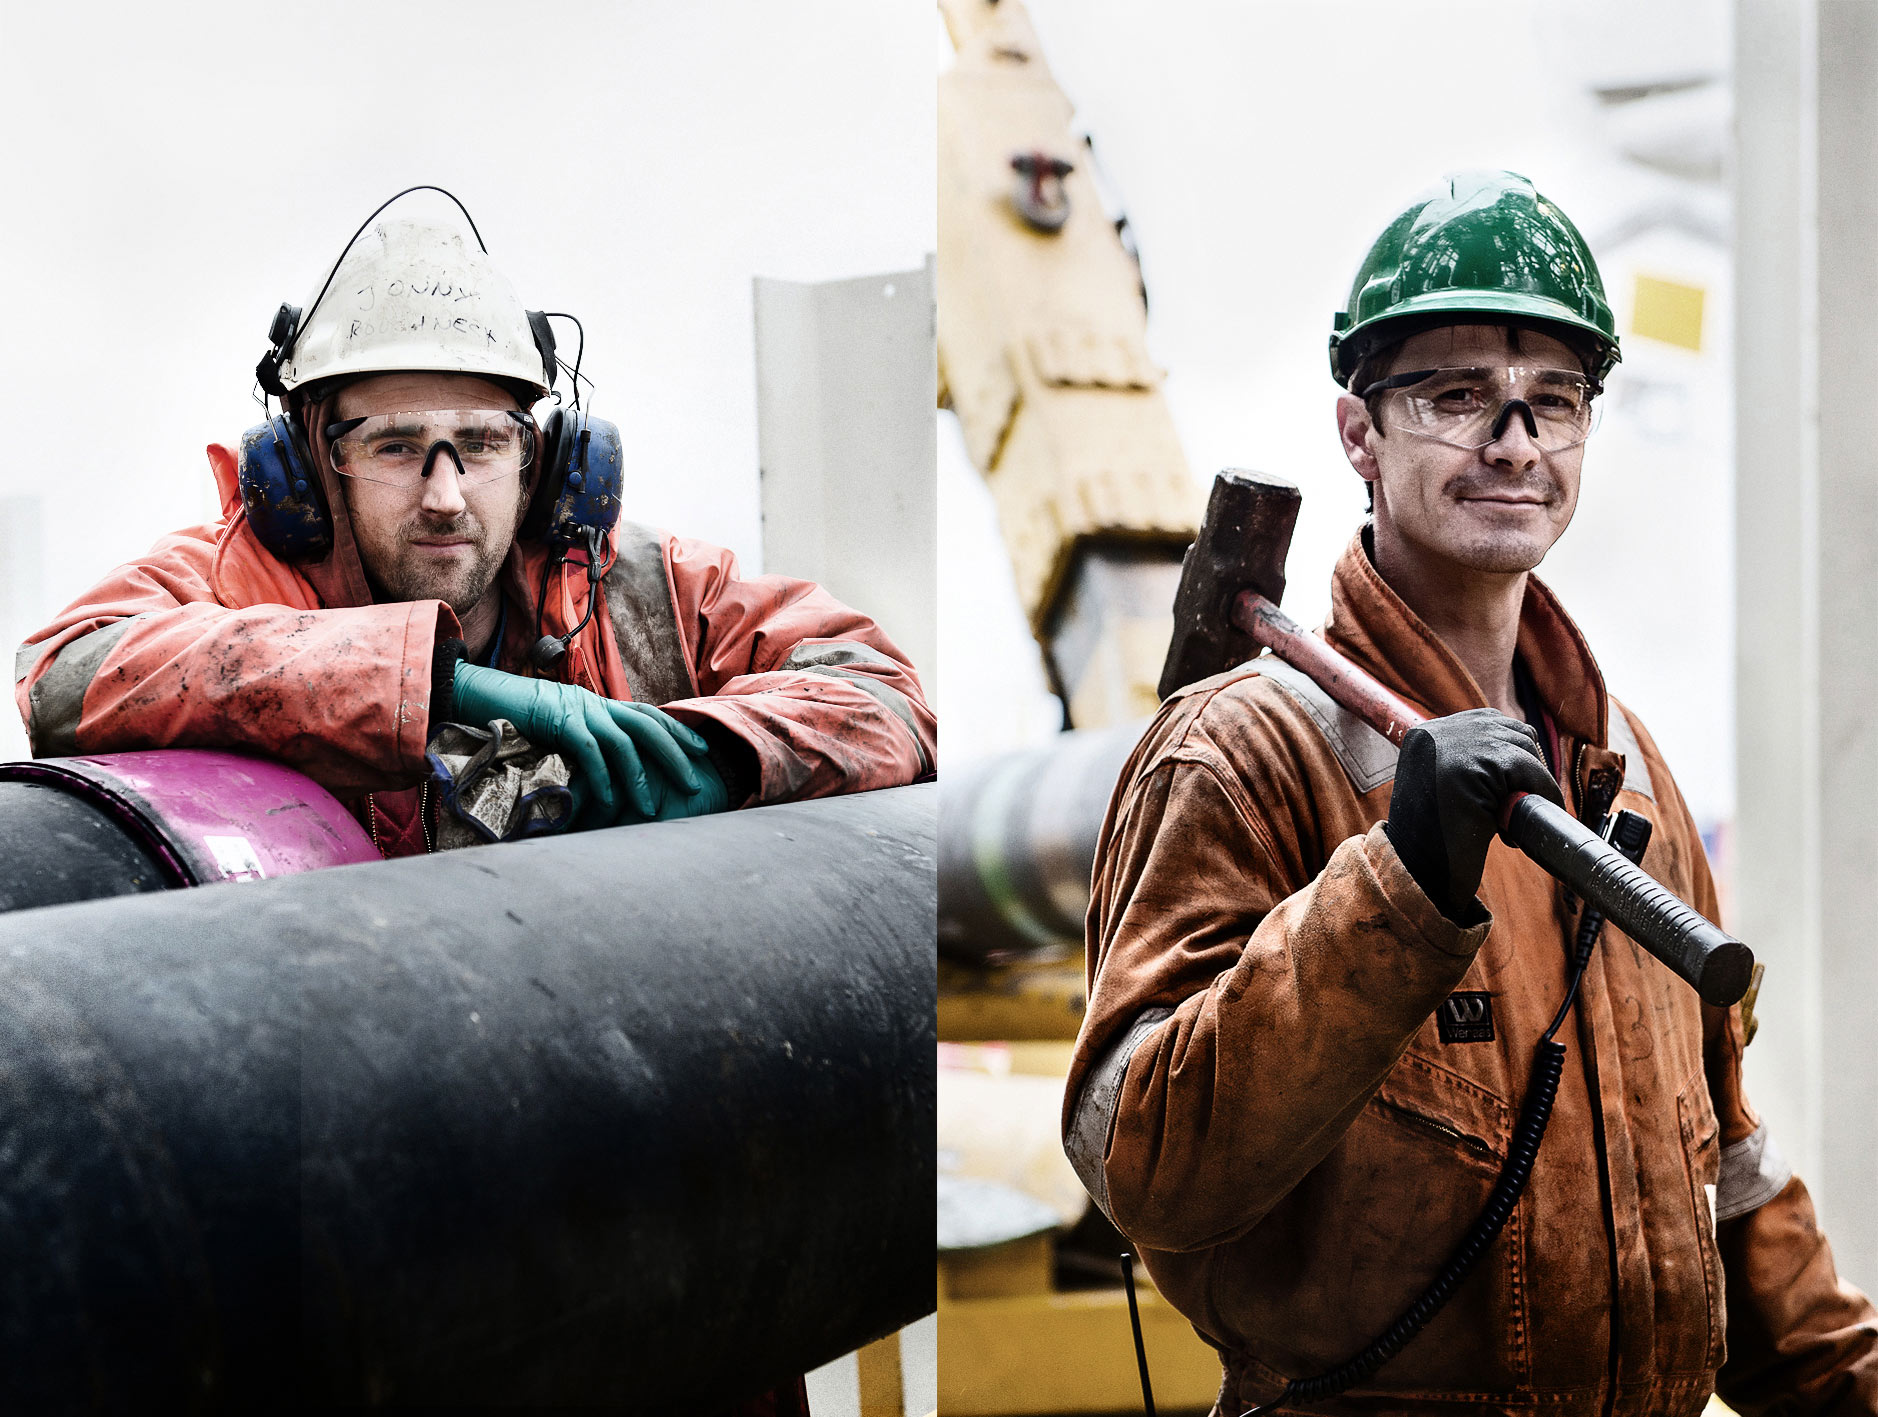 Portraits of oil rig workers, Greenland